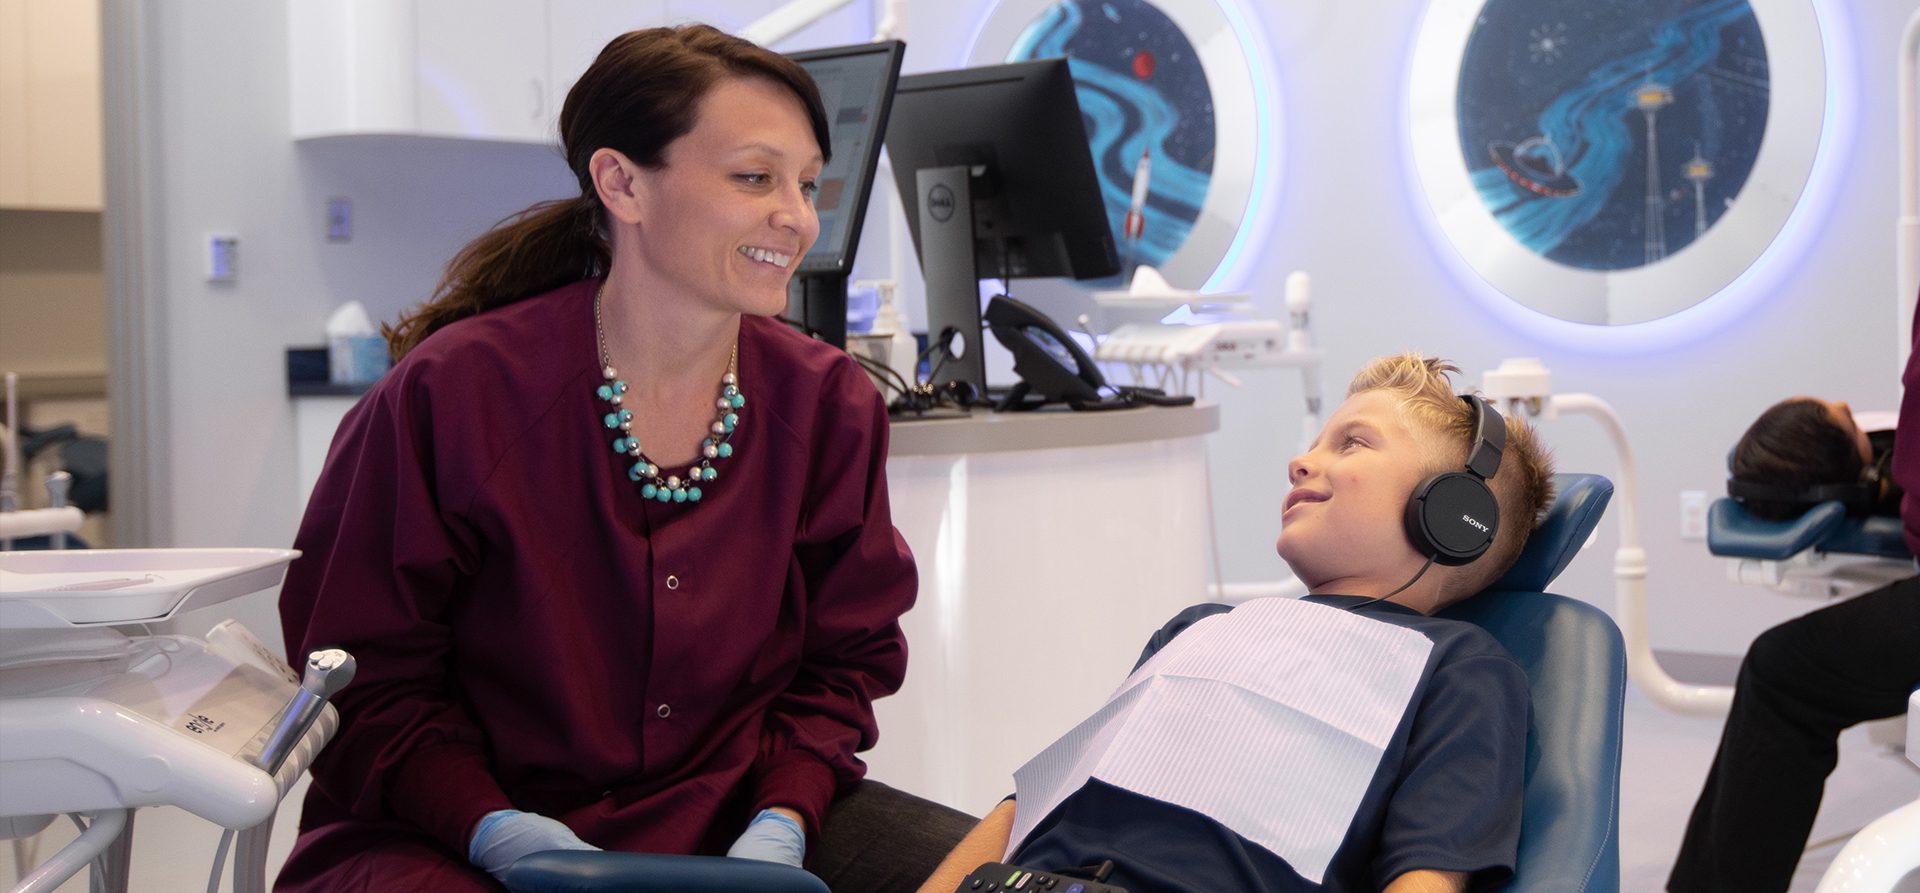 Dr. Julia (DMD) chats with a smiling child during an examination at Ventura Children's Dental